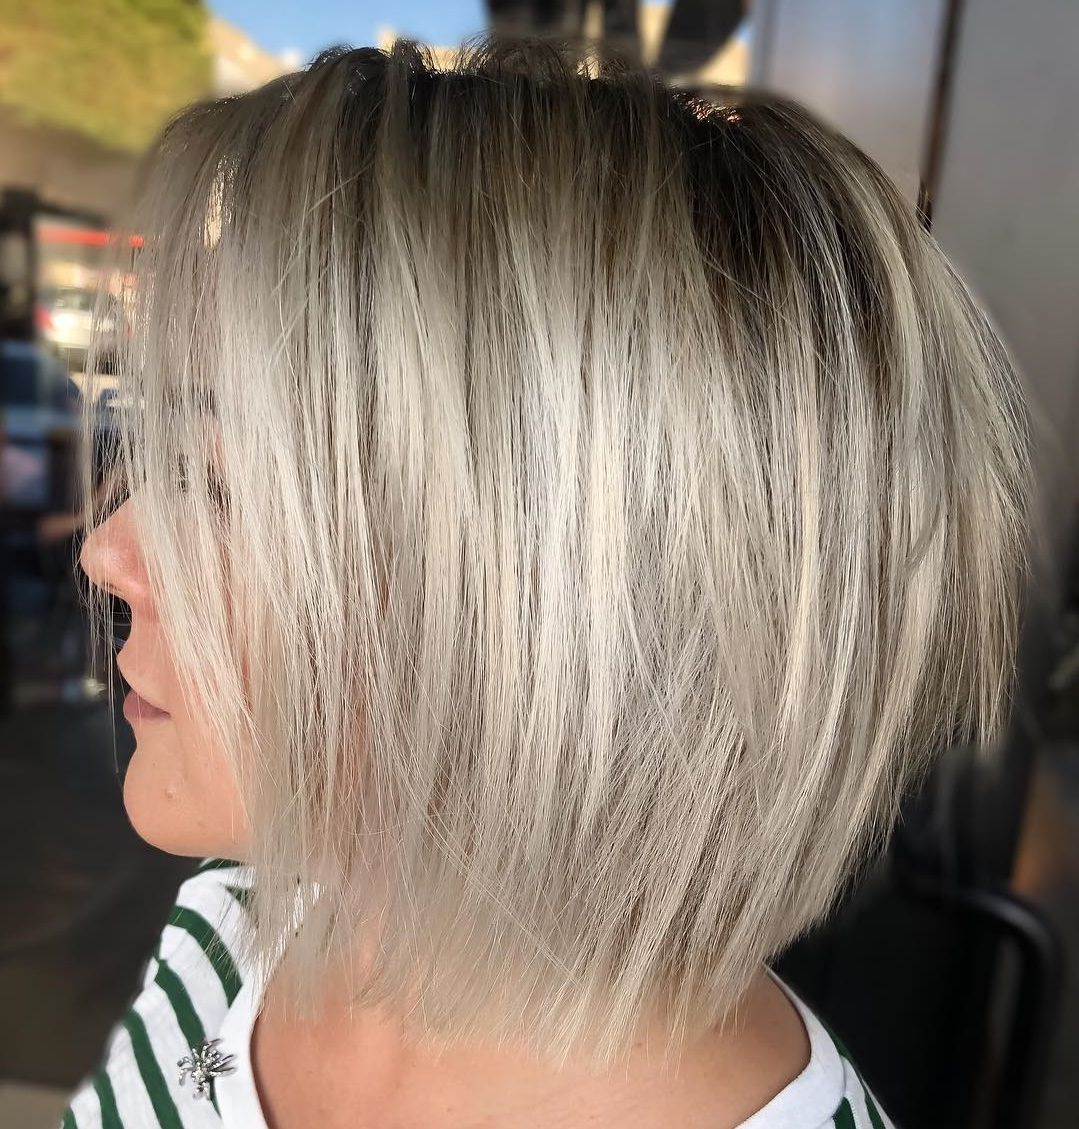 40 Awesome Ideas For Layered Bob Hairstyles You Can't Miss Throughout Angled Bob Hairstyles With Razored Ends (View 9 of 20)